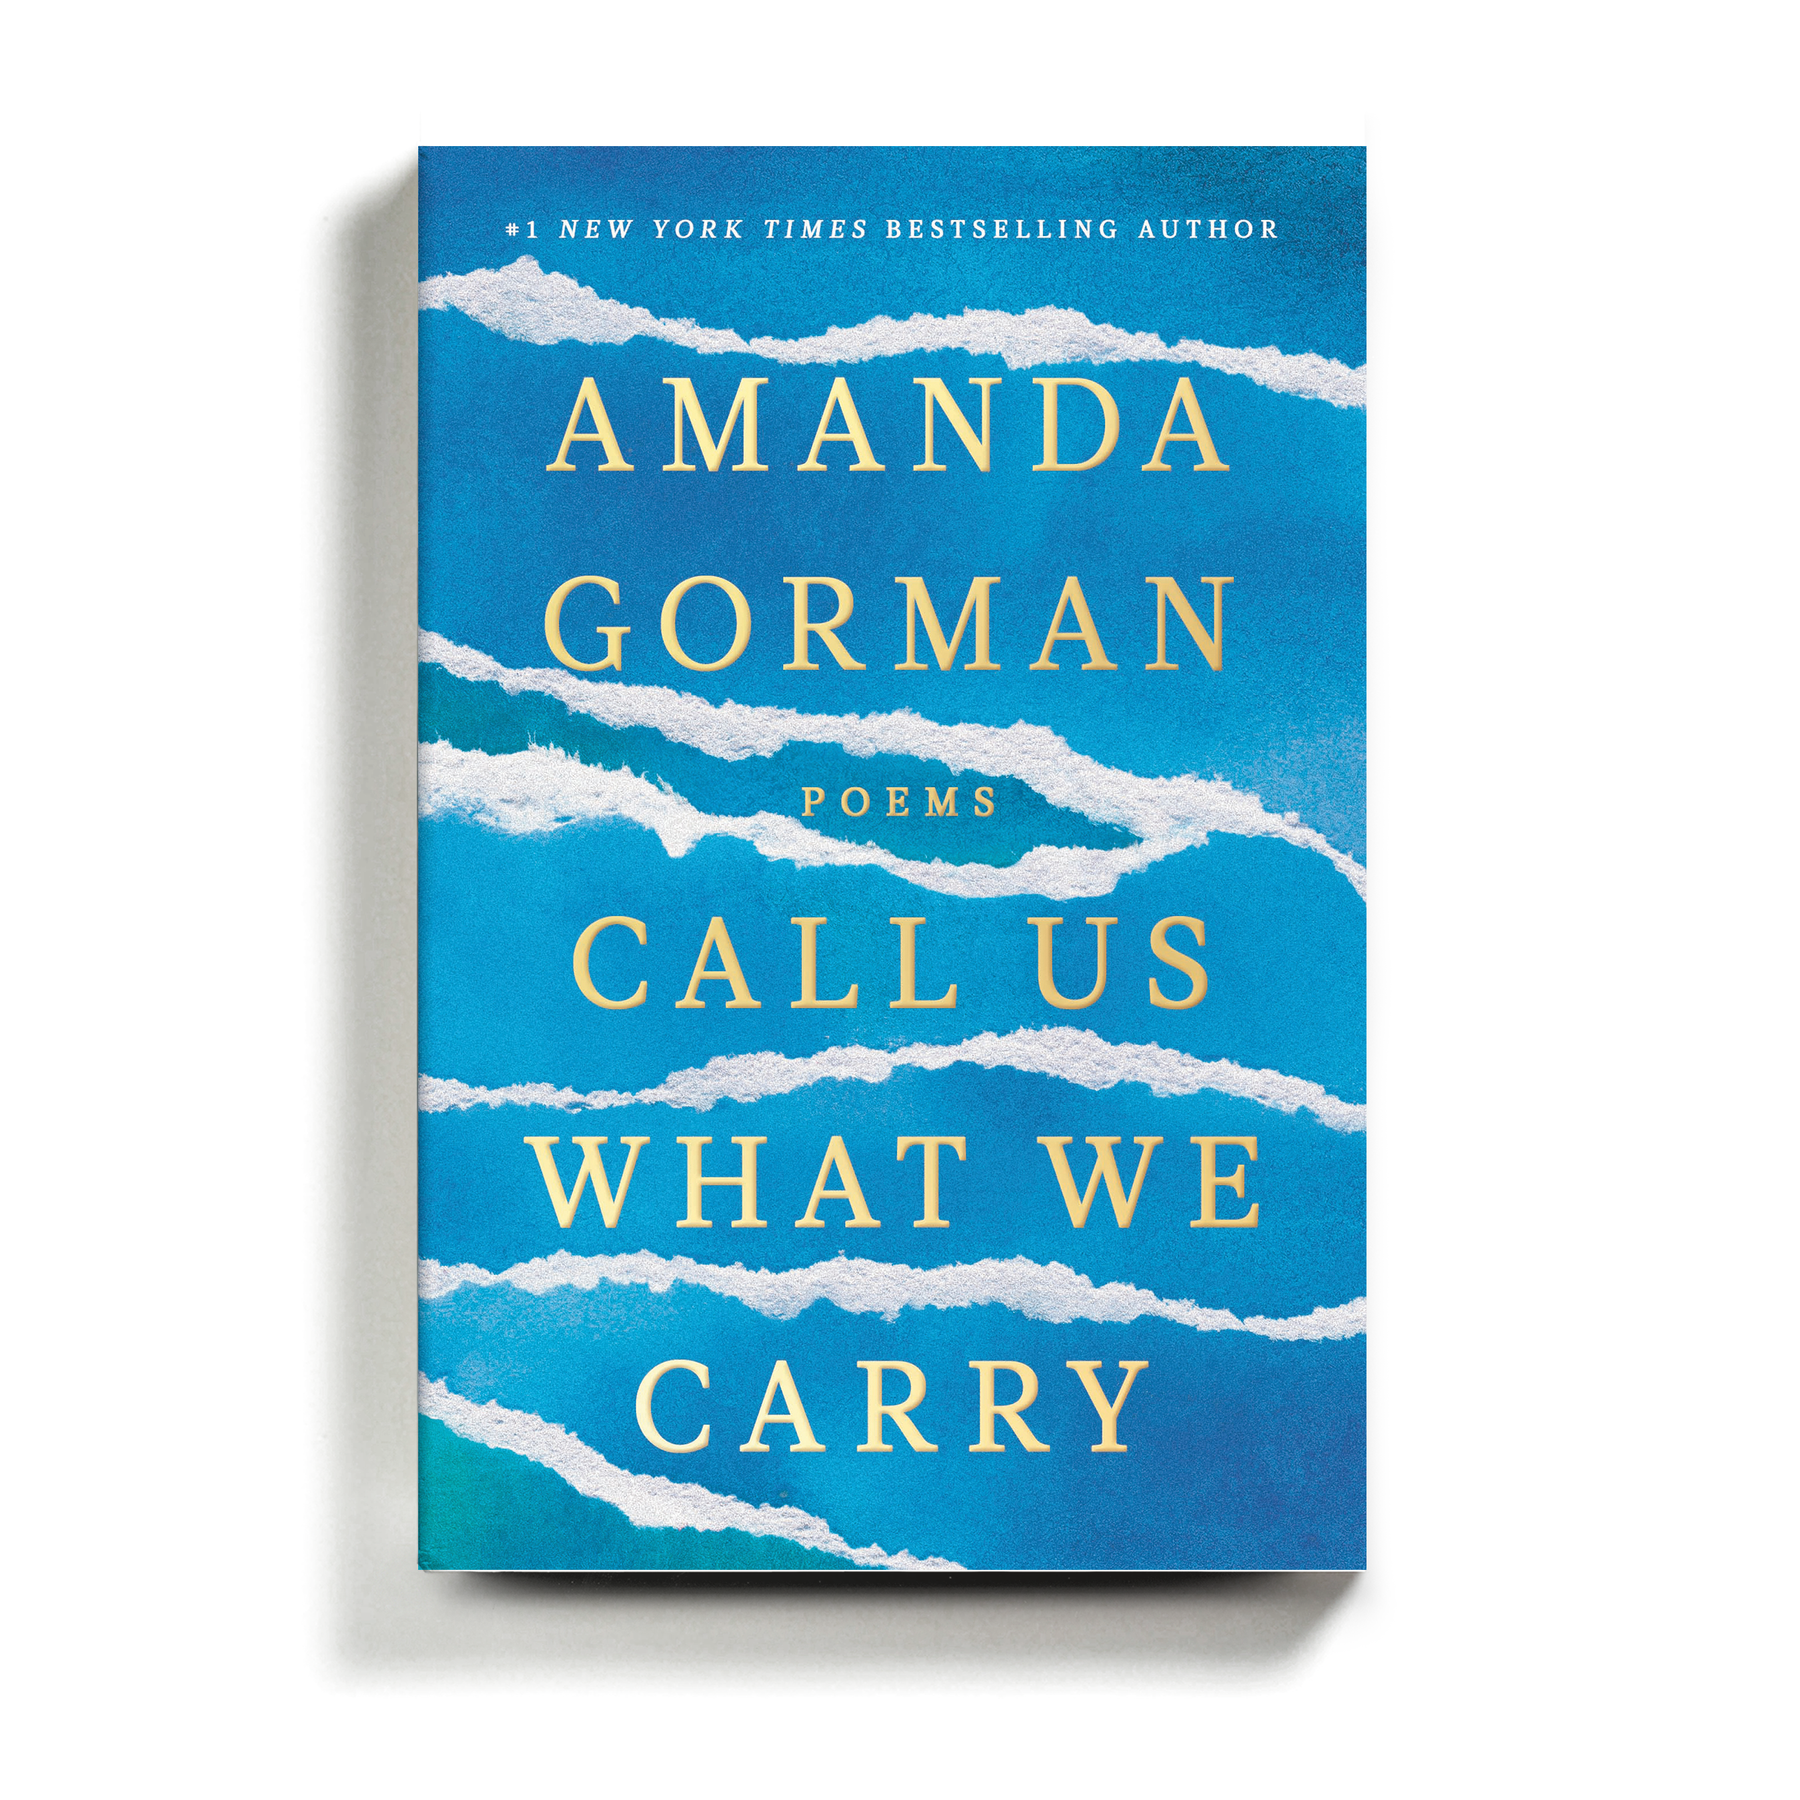 Amanda Gorman tops NYT Bestseller list yet again with 'Call Us What We Carry'